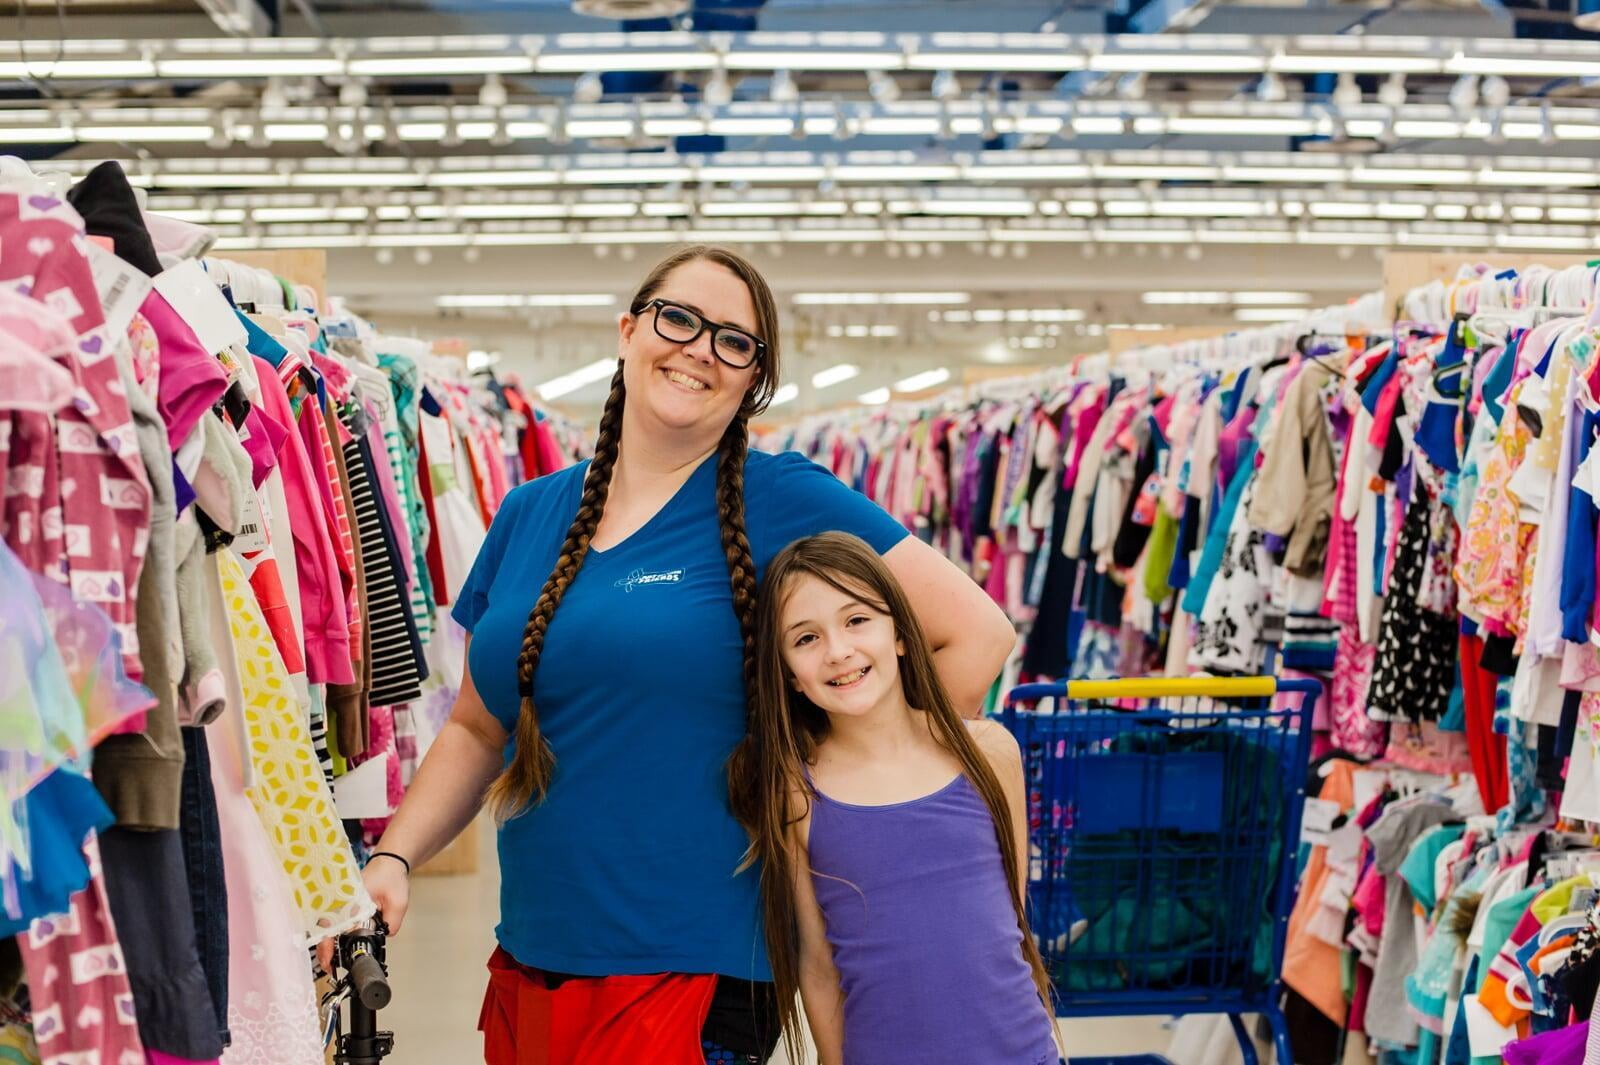 A mom and young daughter smile as they shop rows and rows of clothing.